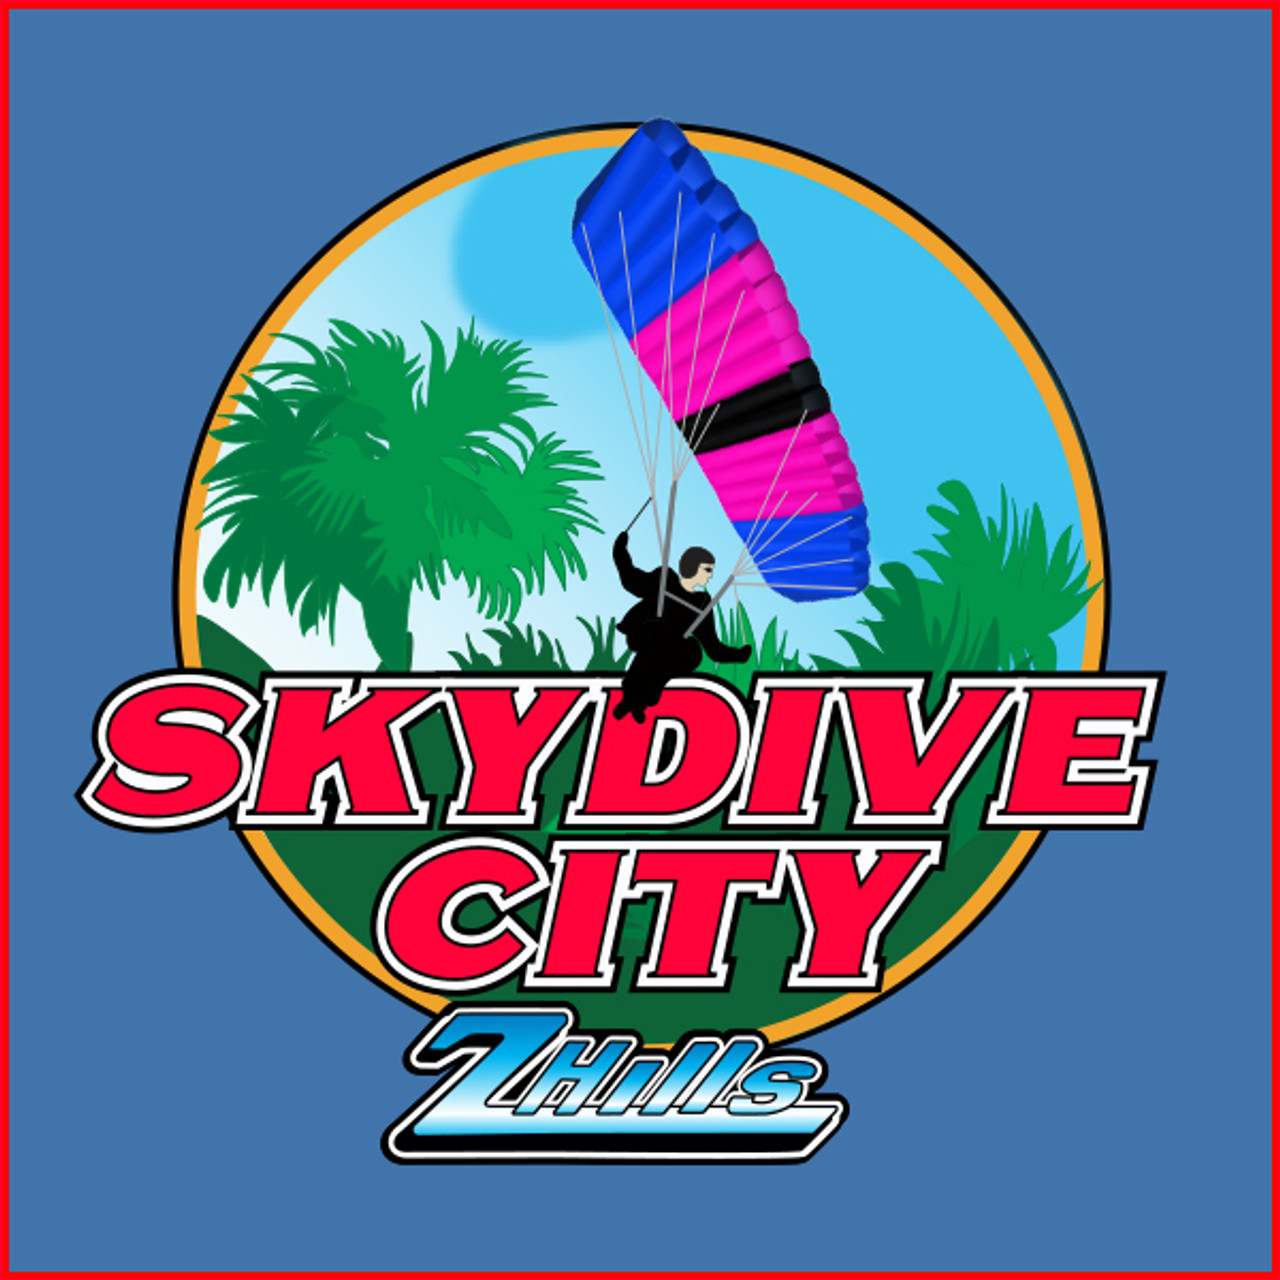 Skydive City Z Hills Cushion And Blanket Skydive Store Inc